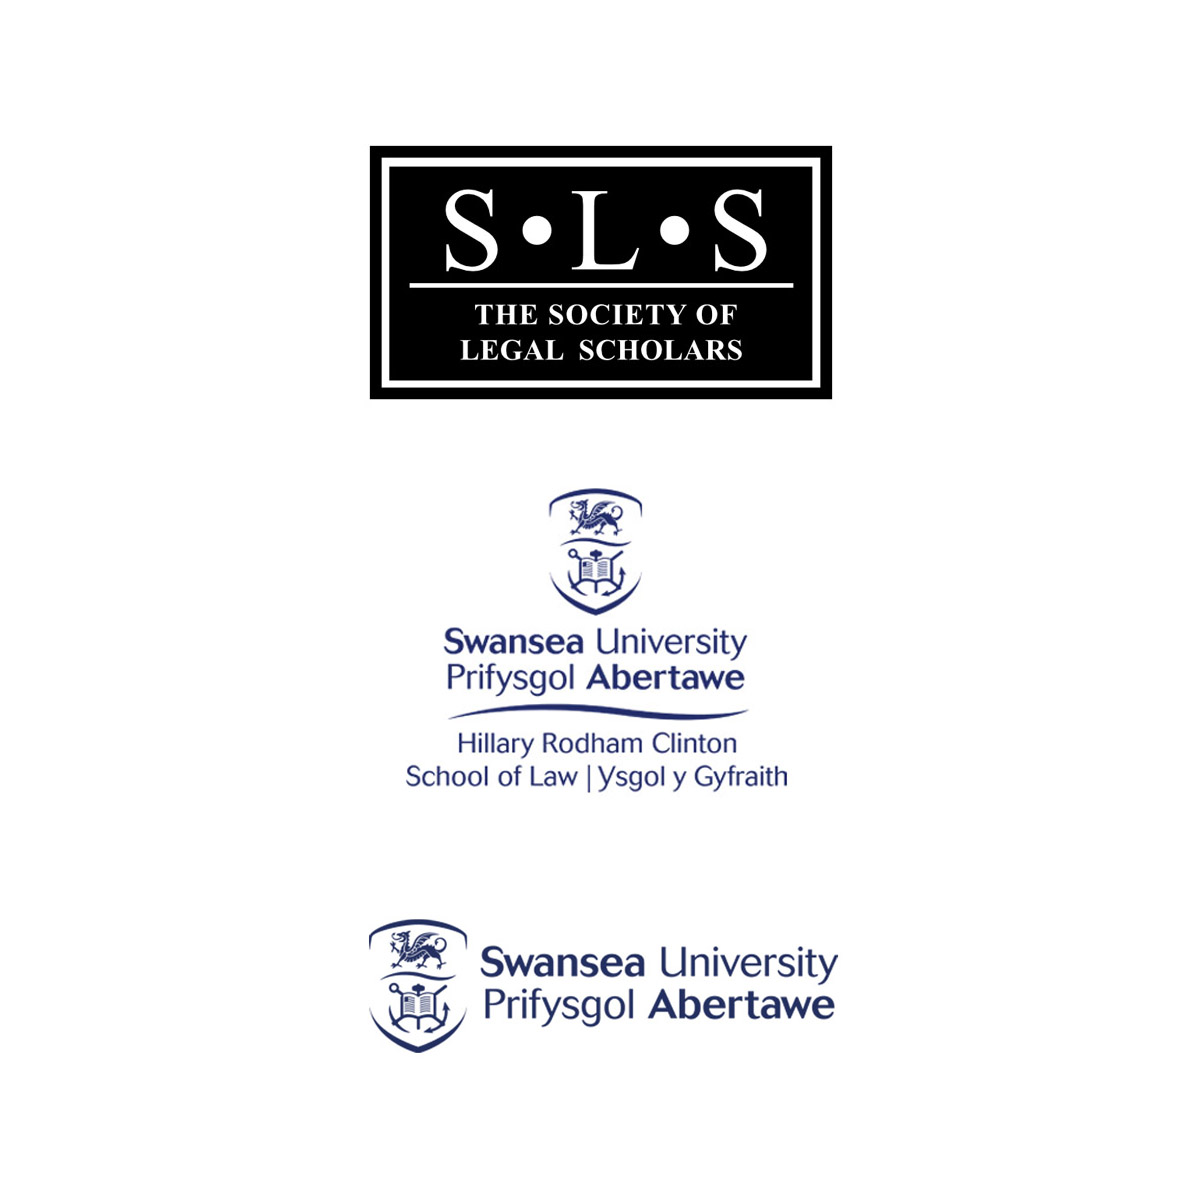 The logo of the SLS, School of Law and Swansea University